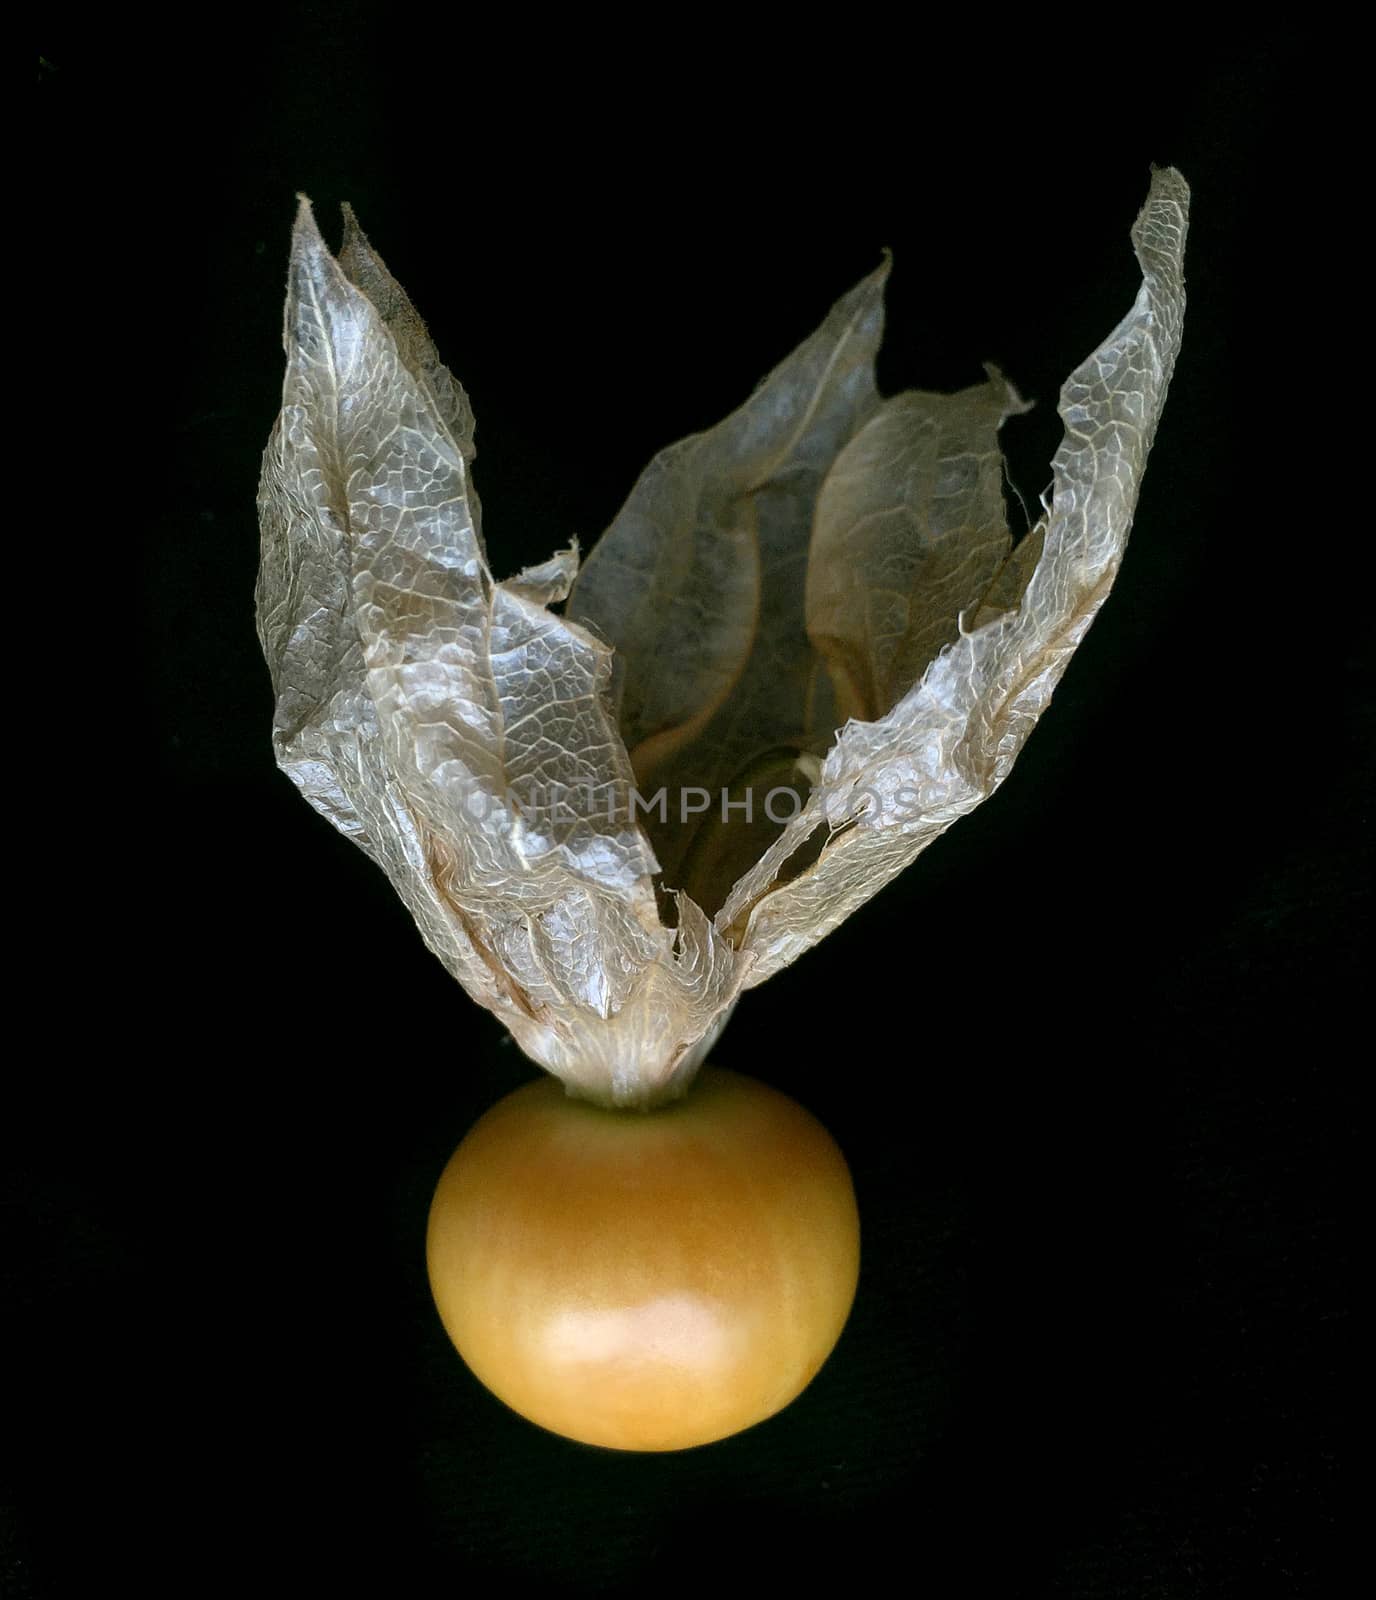 Cape gooseberry. The plants in the family Solanaceae, which is the same family as tomatoes, potatoes, tomatoes, eggplant and purple branches of a plant. It is a fin Heavily coated Its flowers are axillary flowers hanging down.